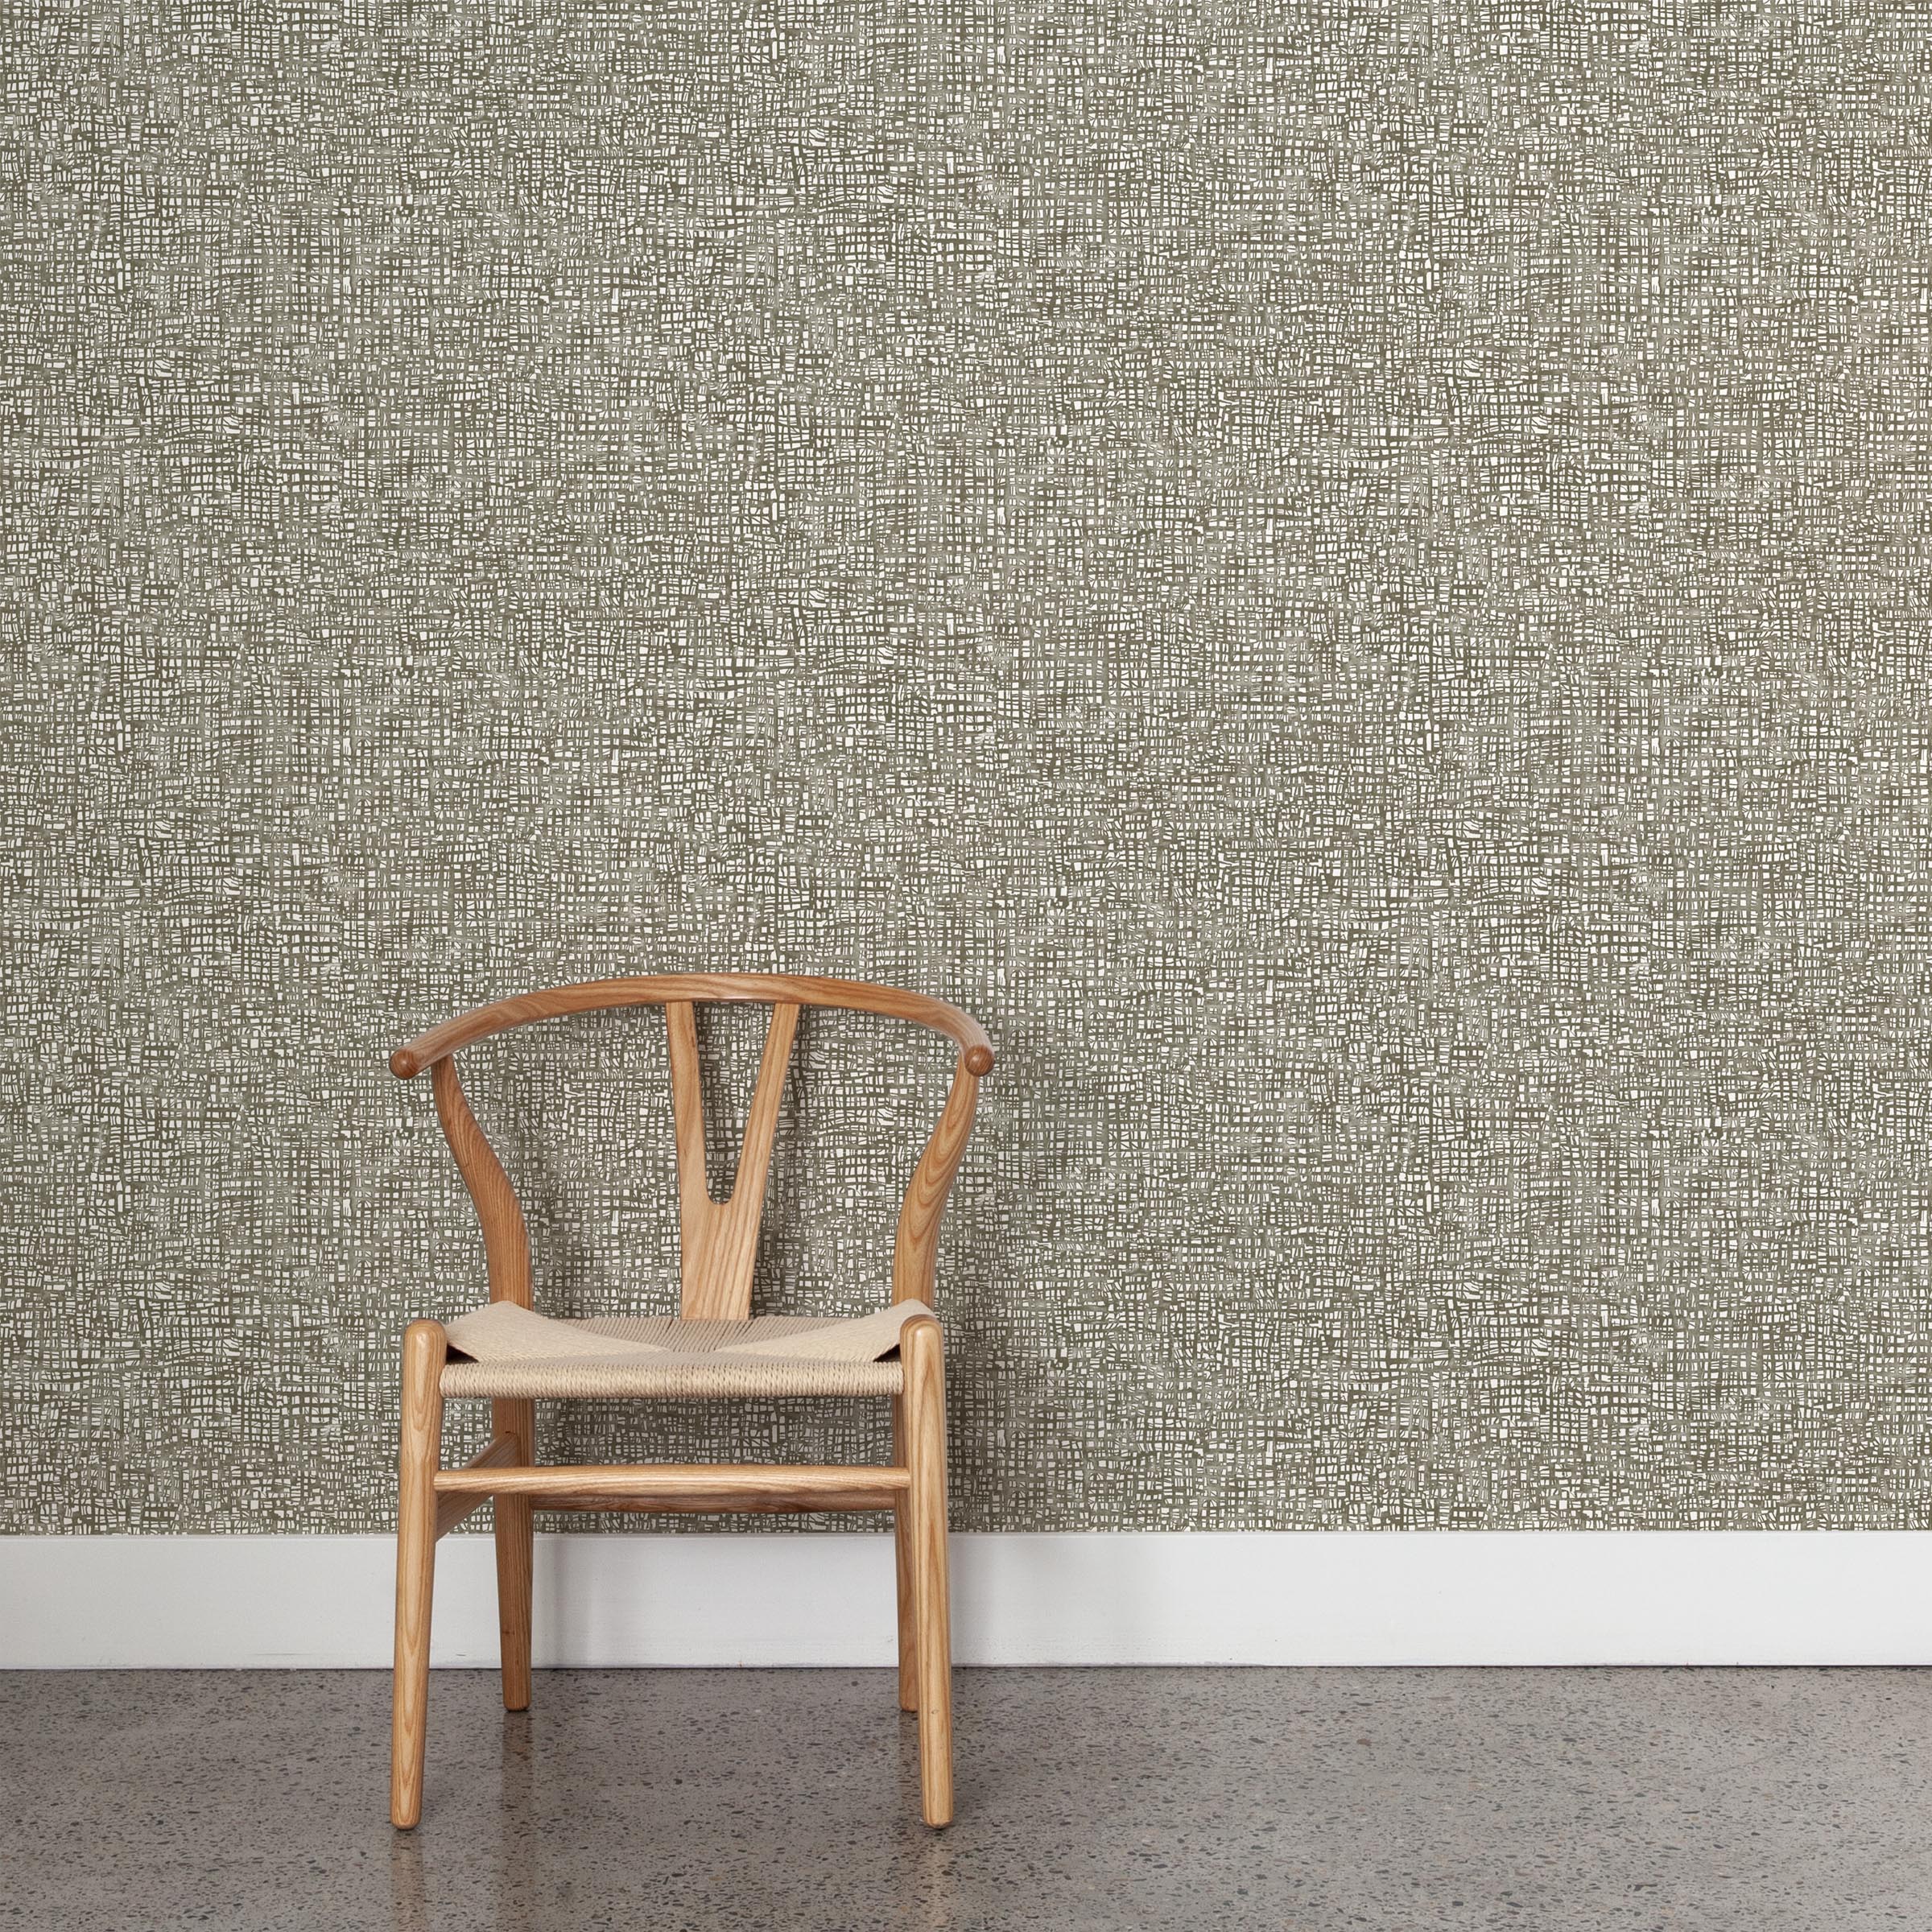 A wooden chair stands in front of a wall papered in a textural wicker pattern in mottled brown on a white field.